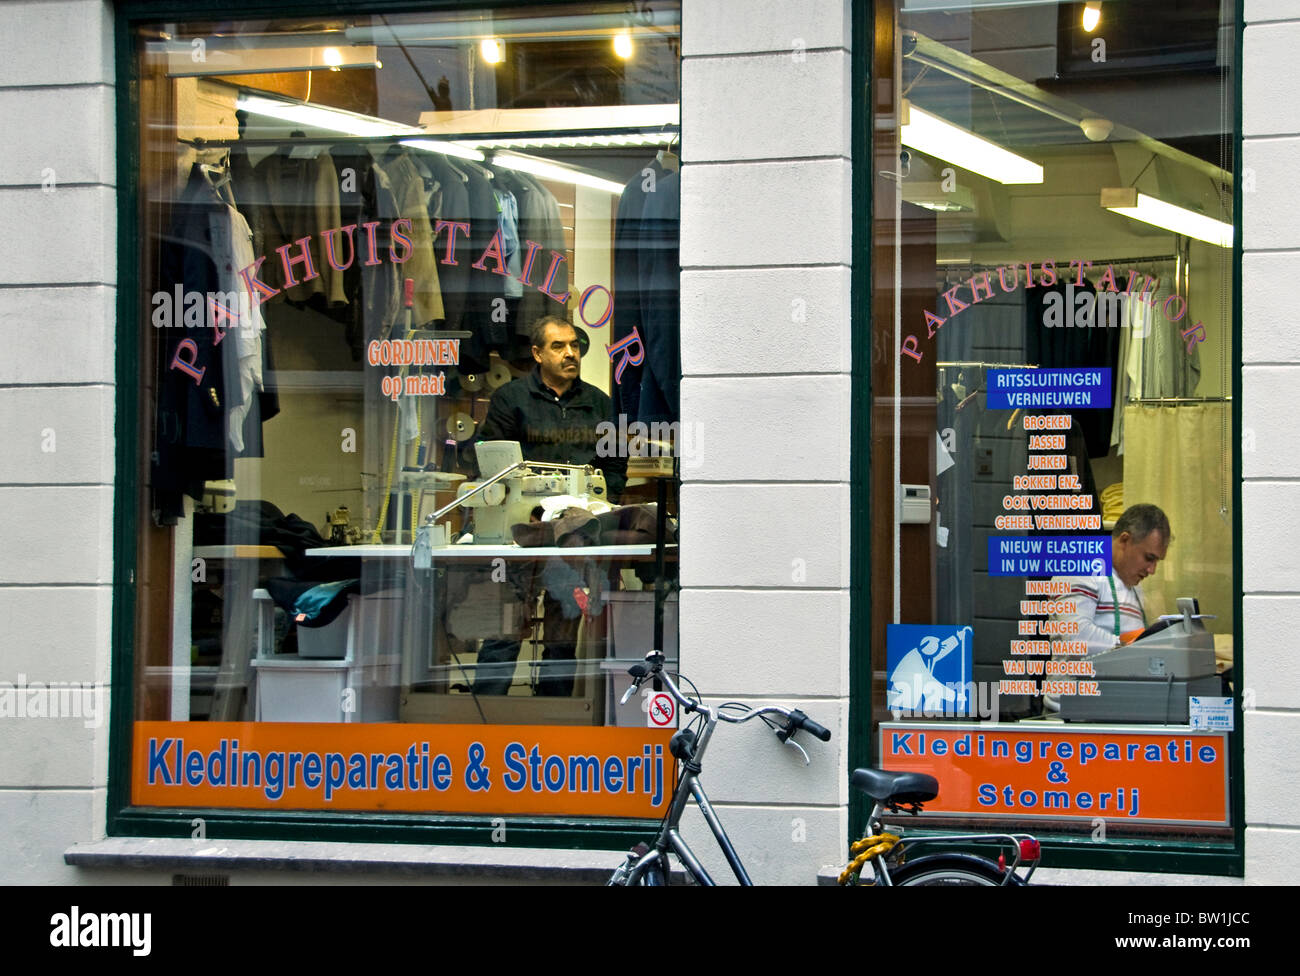 Netherlands The Hague Clothing Repair and Dry Cleaning Stock Photo